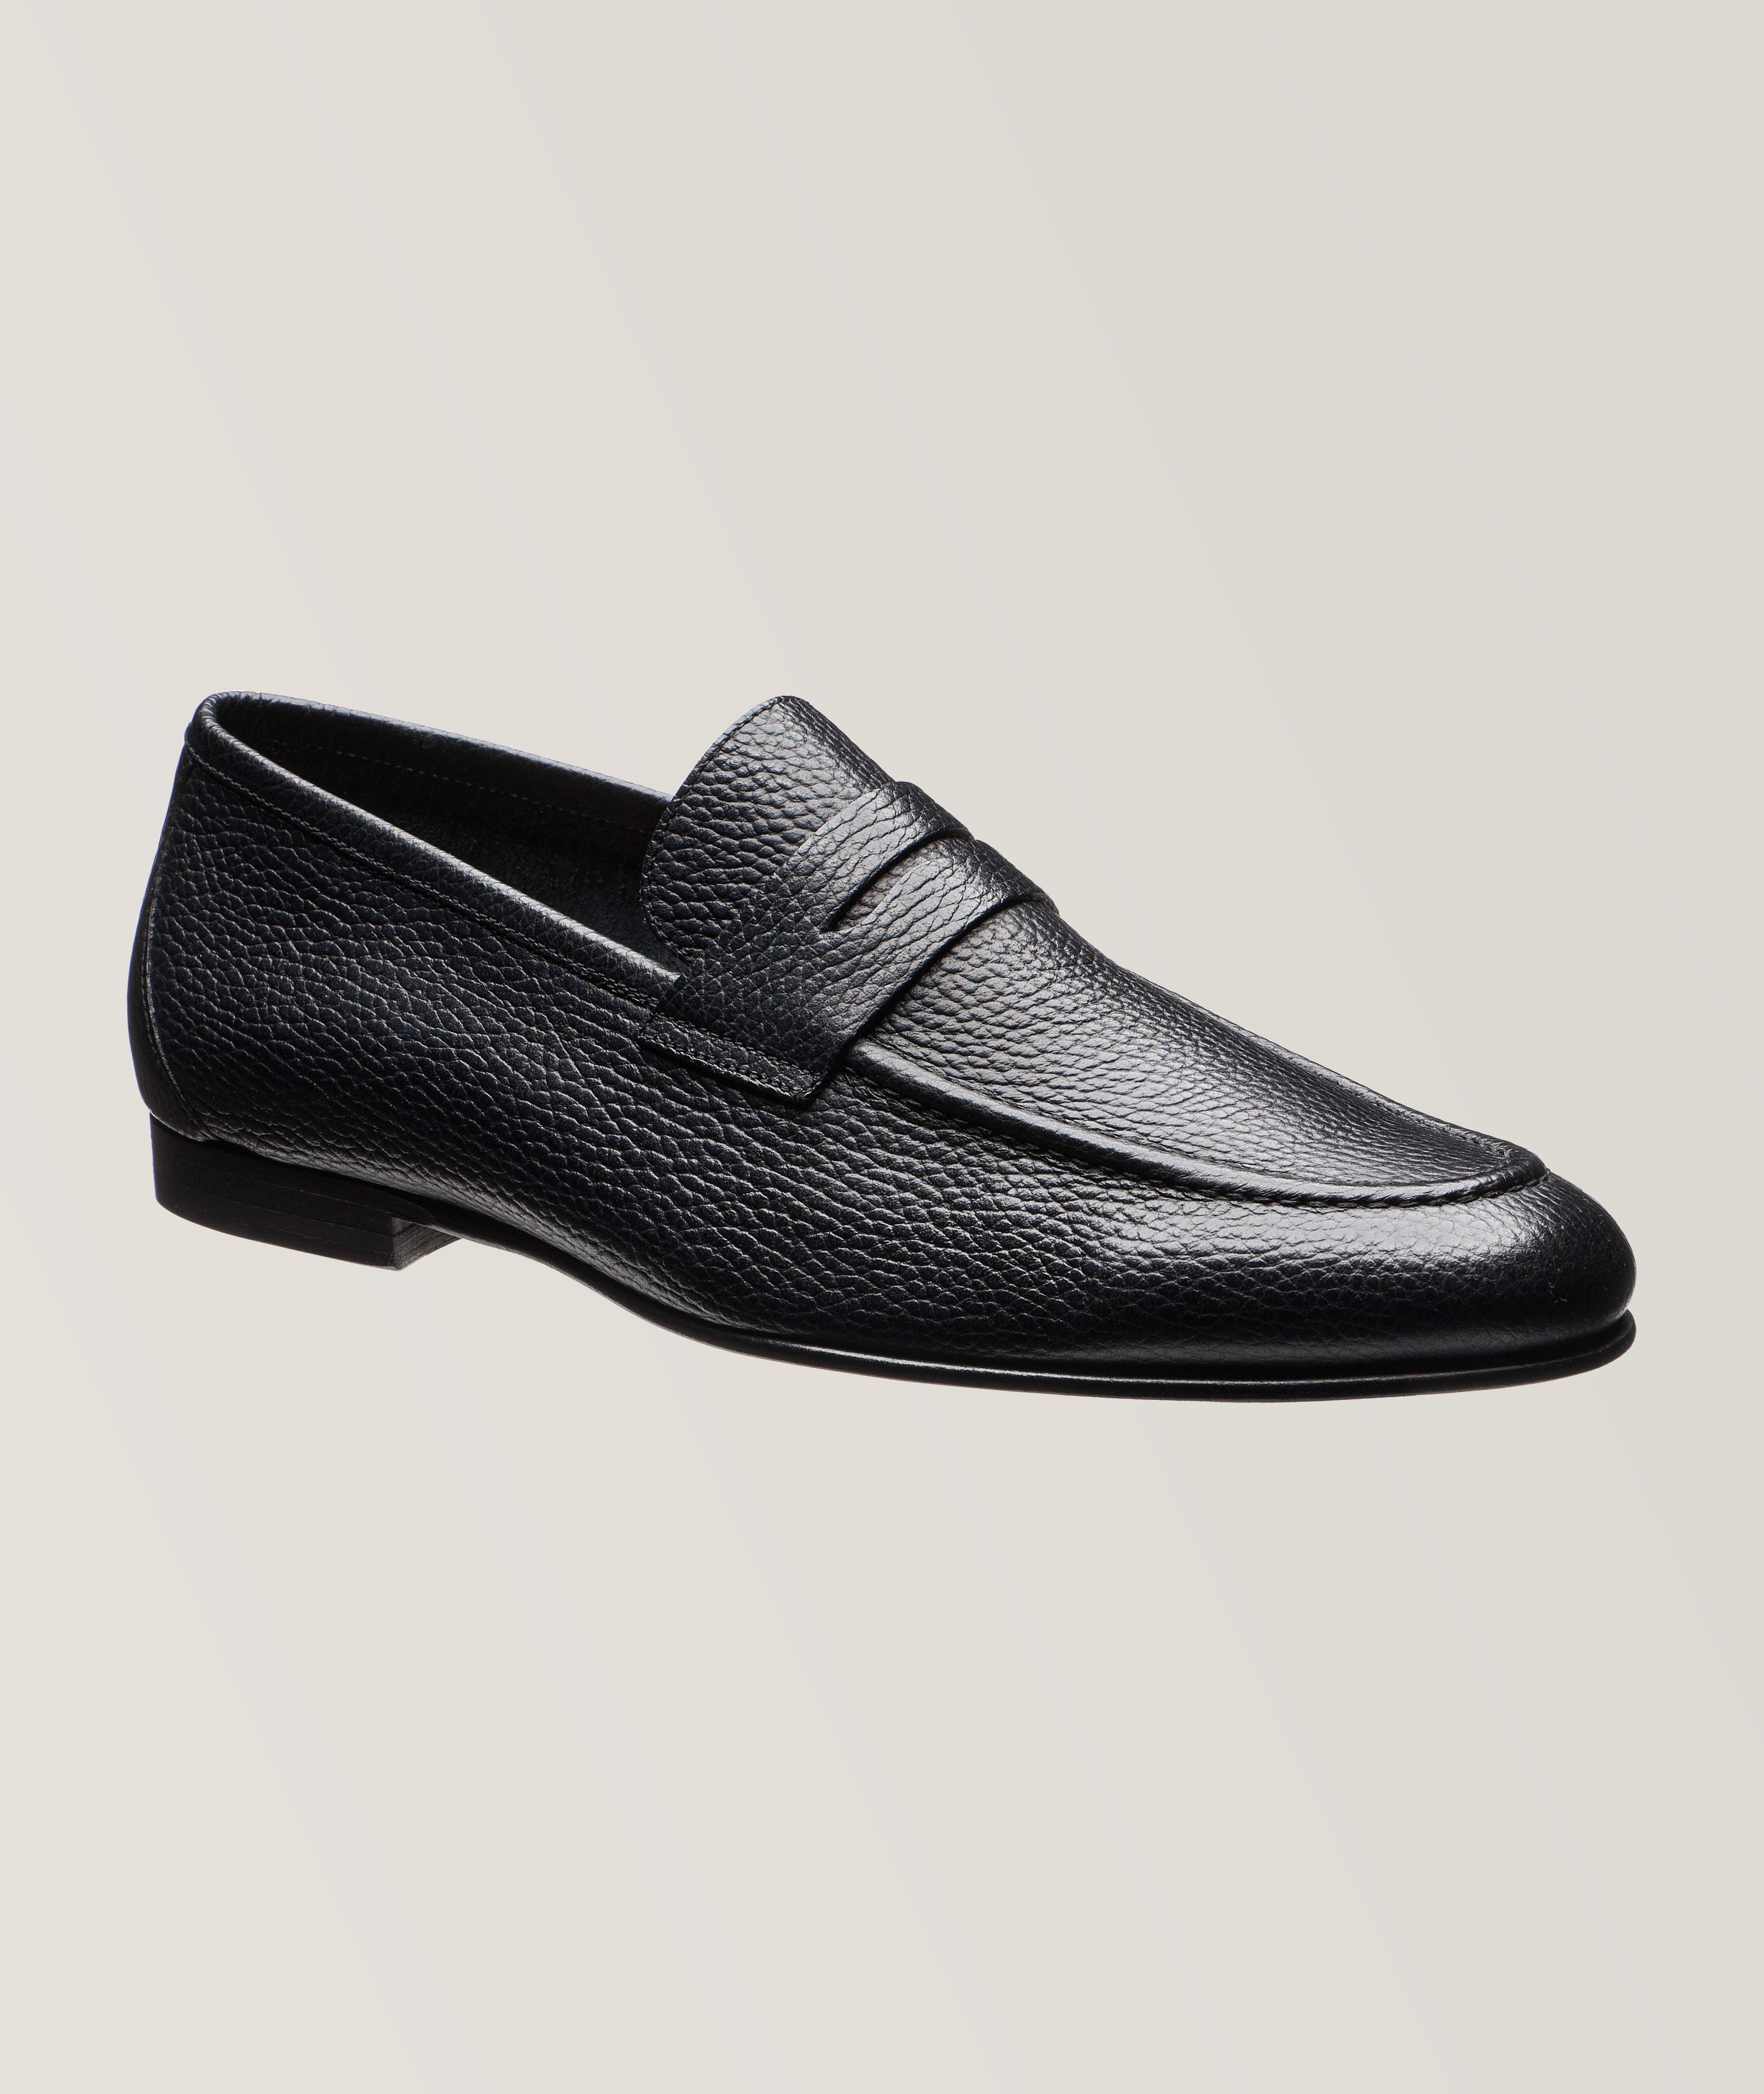 Ravello Grain Leather Penny Loafers image 0